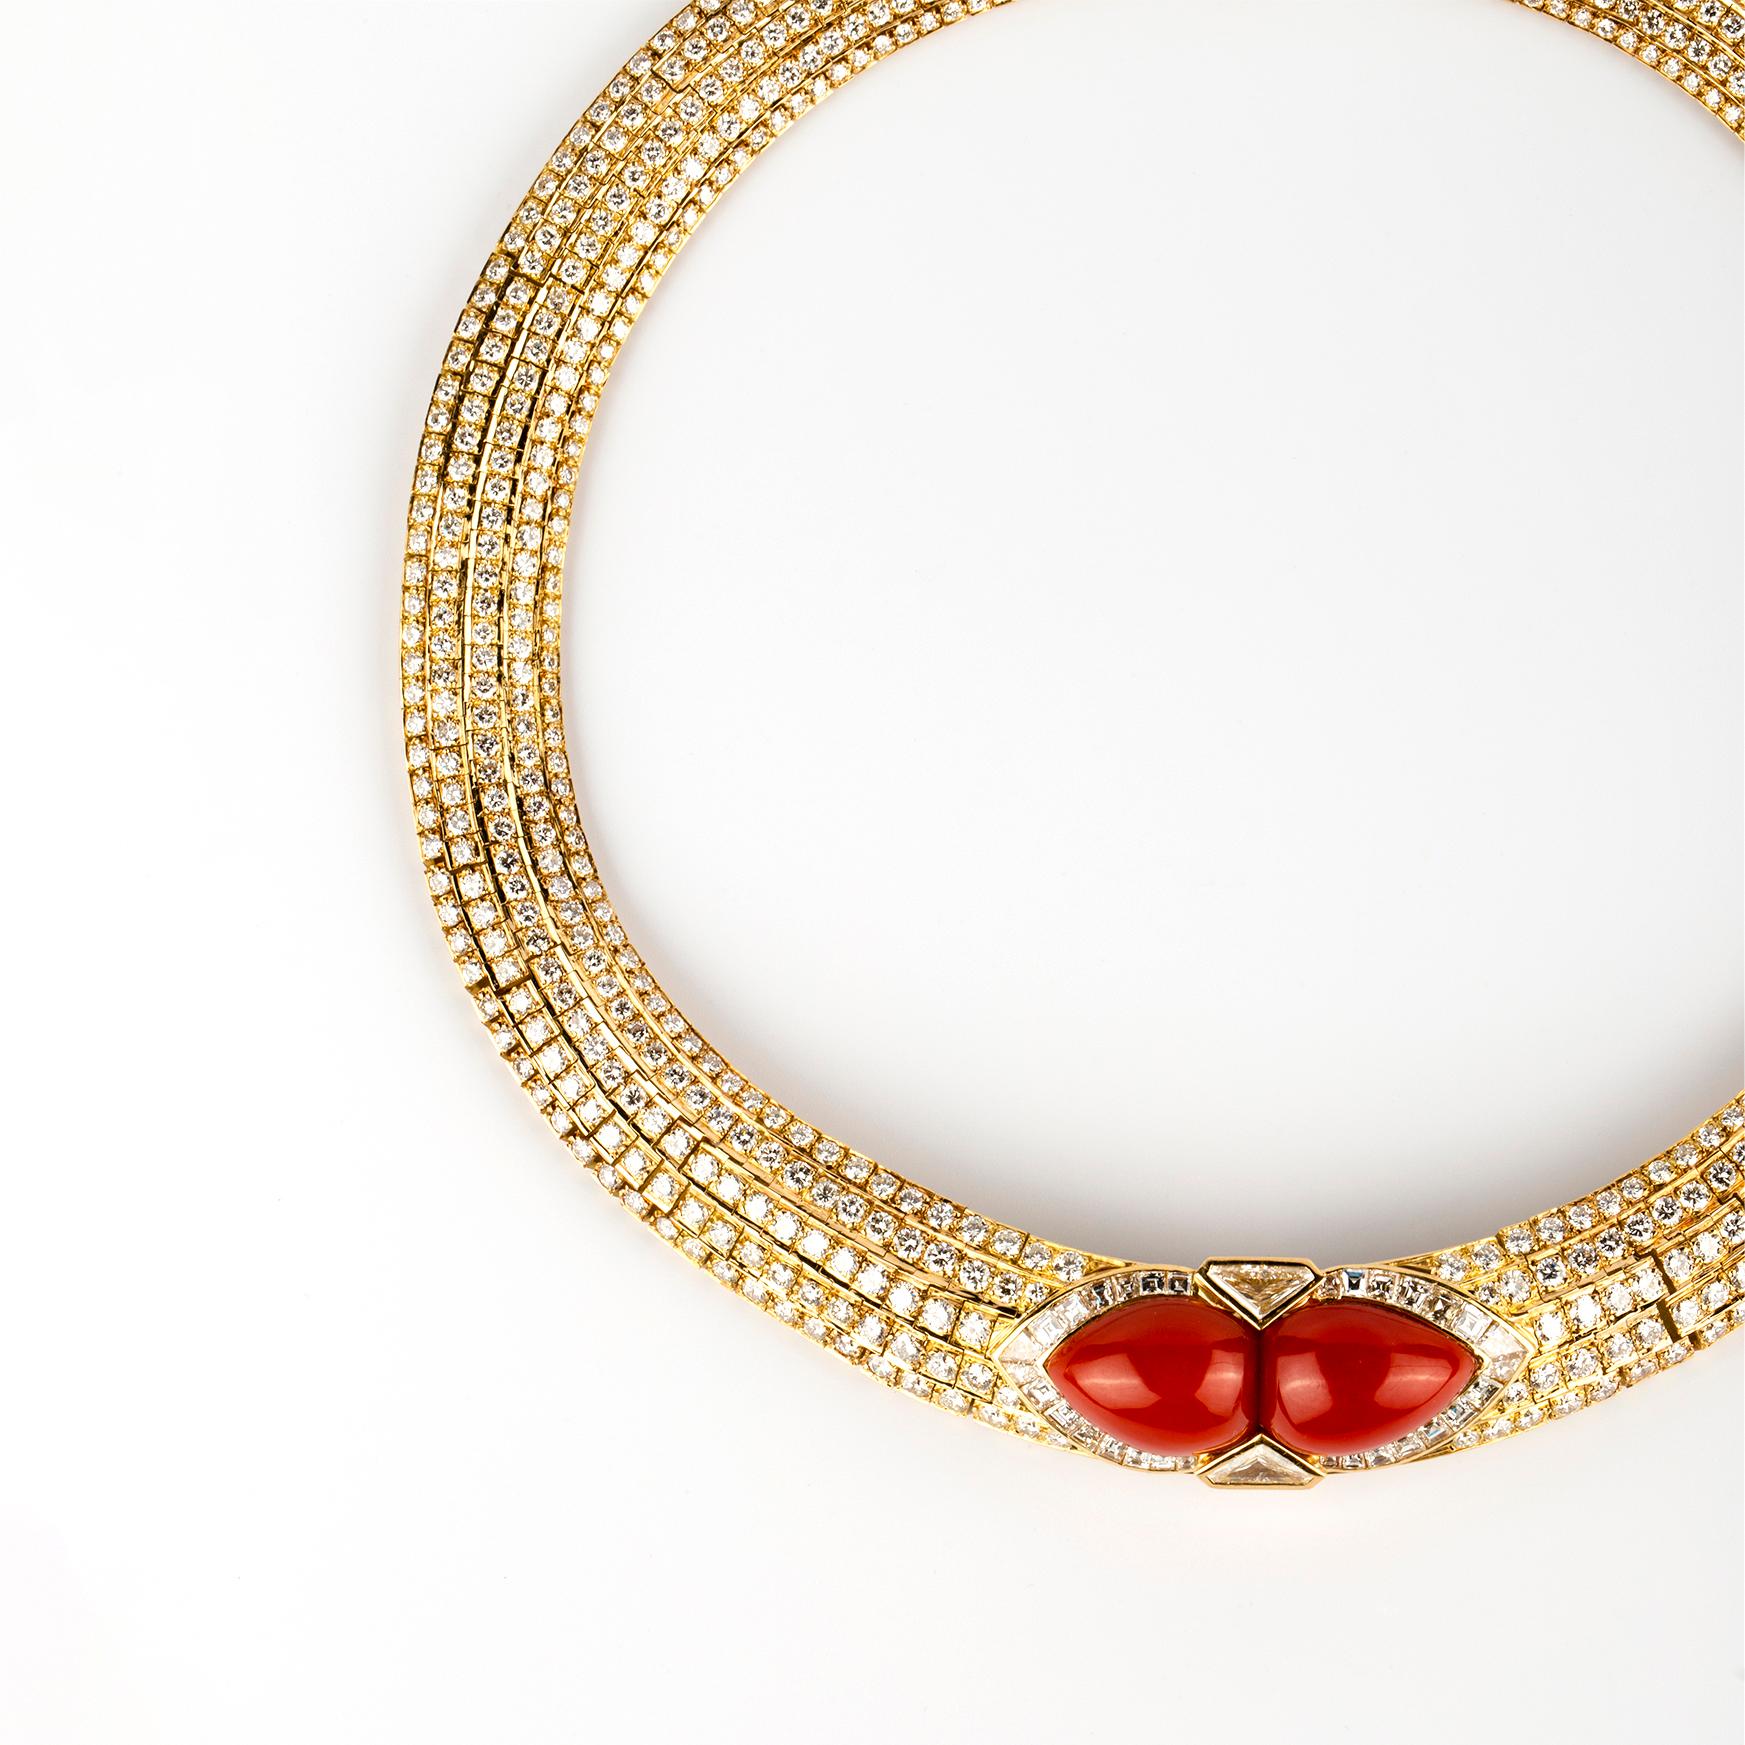 House of Tabbah necklace in 18k gold with 47 carats of diamonds and coral lozenges. Made in Paris, circa 1960.